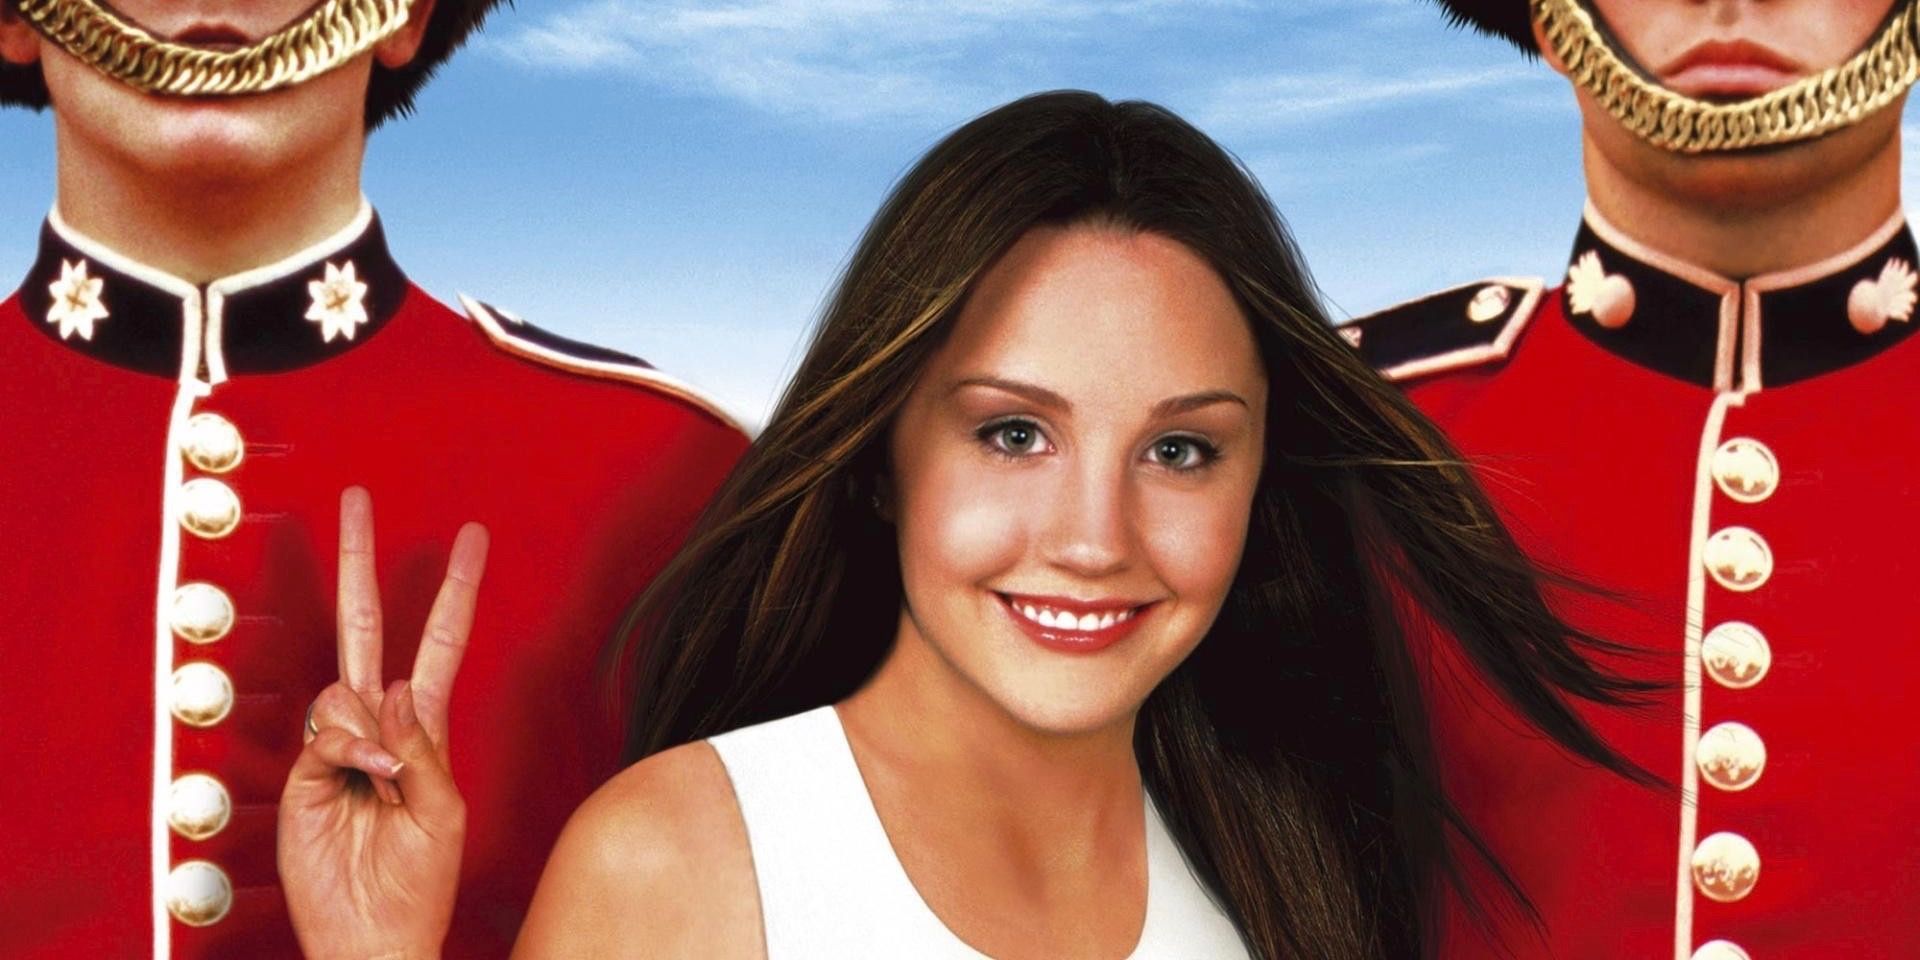 Amanda Bynes in What a Girl Wants